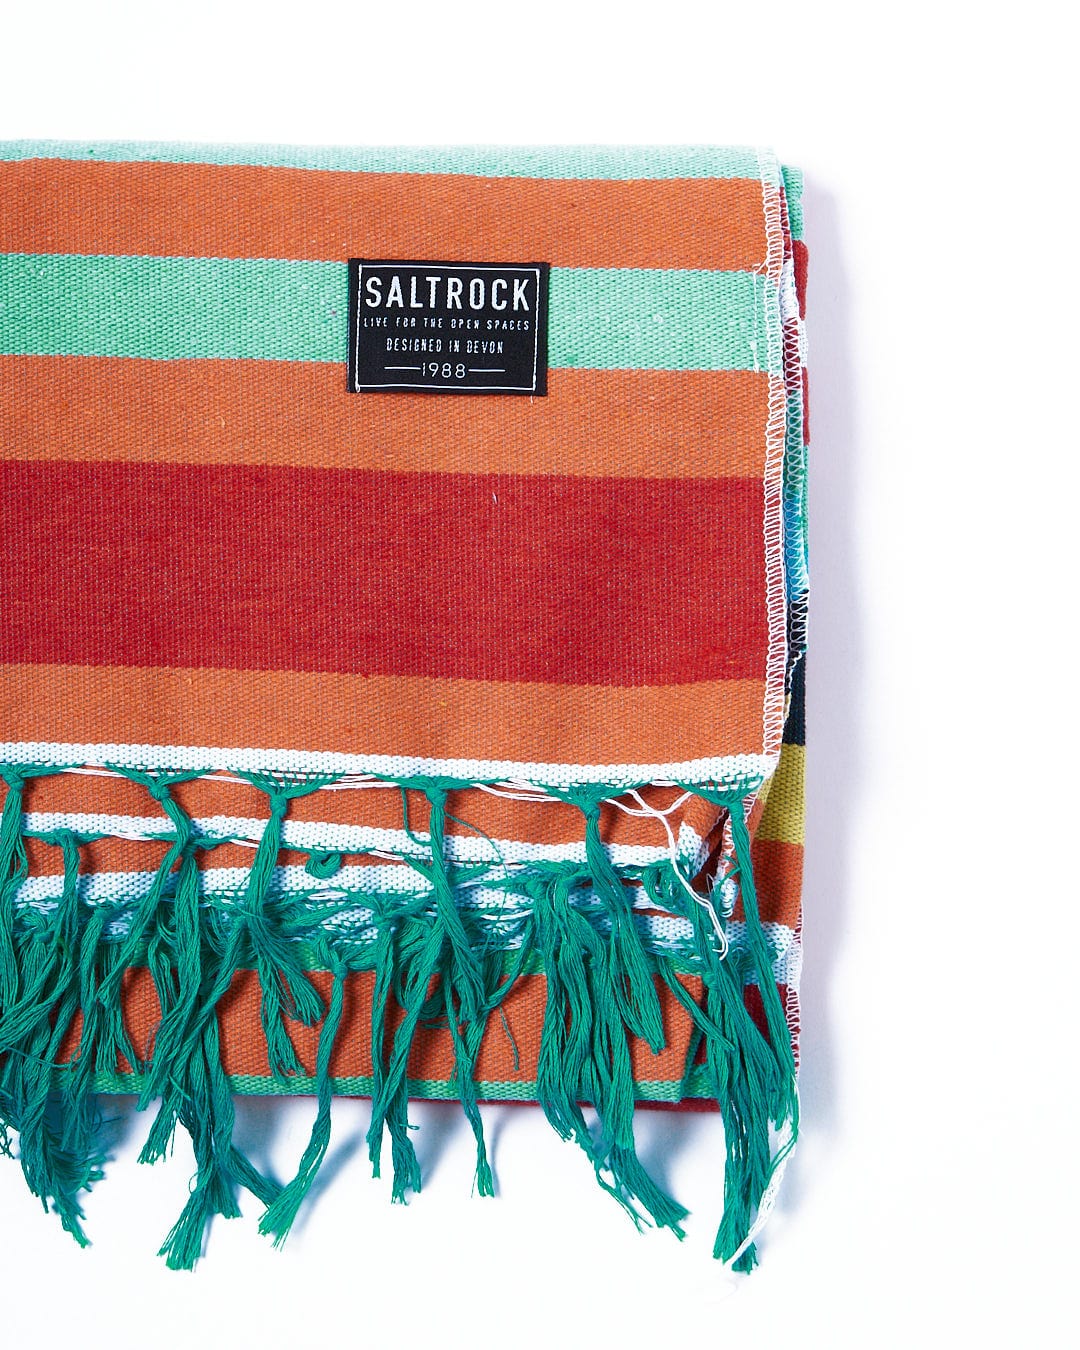 A colorful striped Recycled Picnic Blanket - Multi with fringes on it by Saltrock.